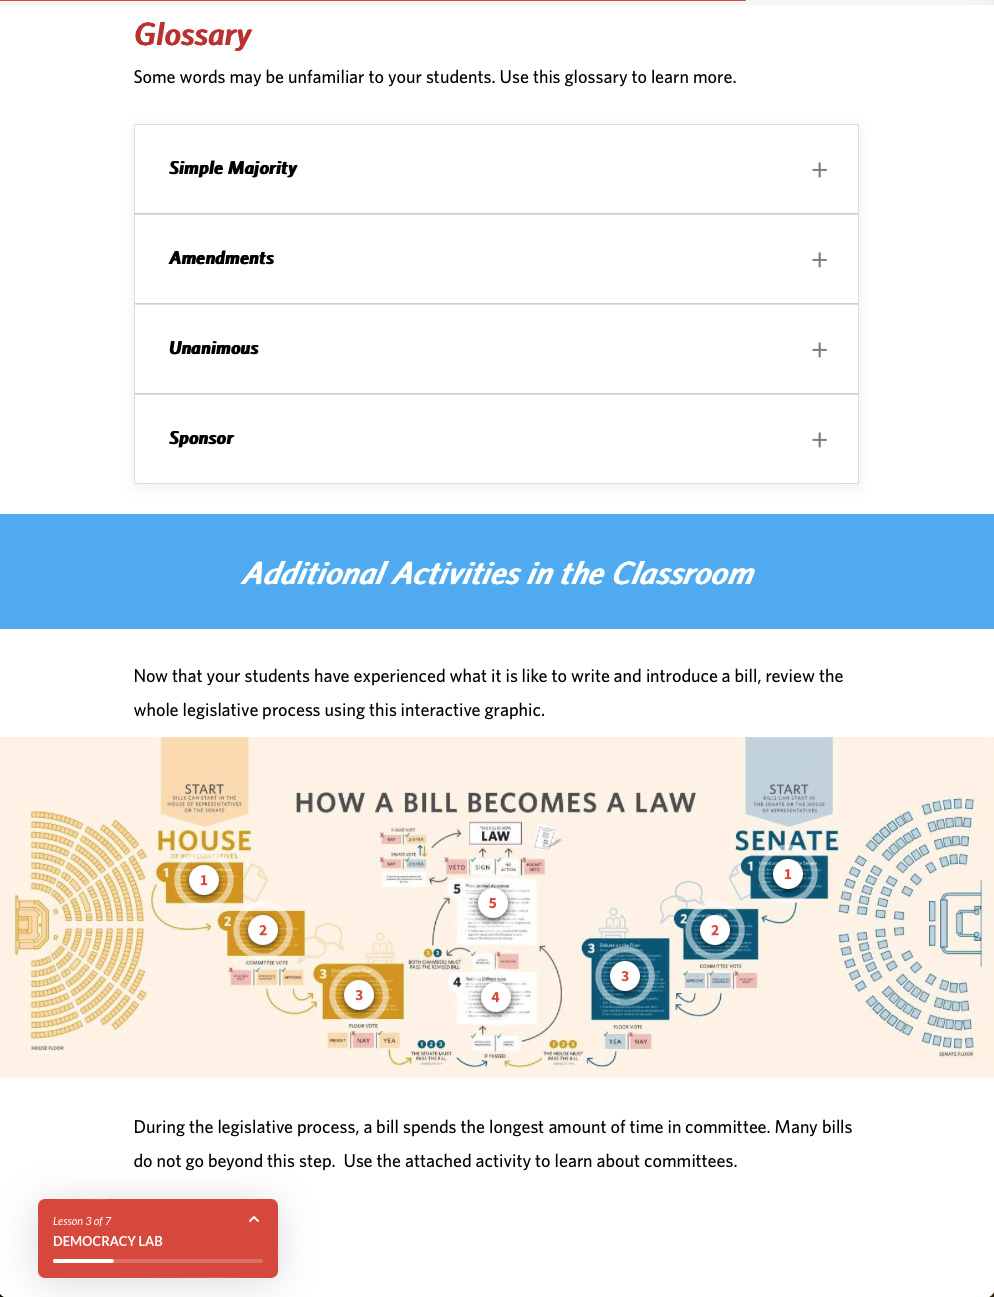 Democracy Lab Teacher Virtual Resource - Pass a Bill Glossary and Pre-Visit Activity